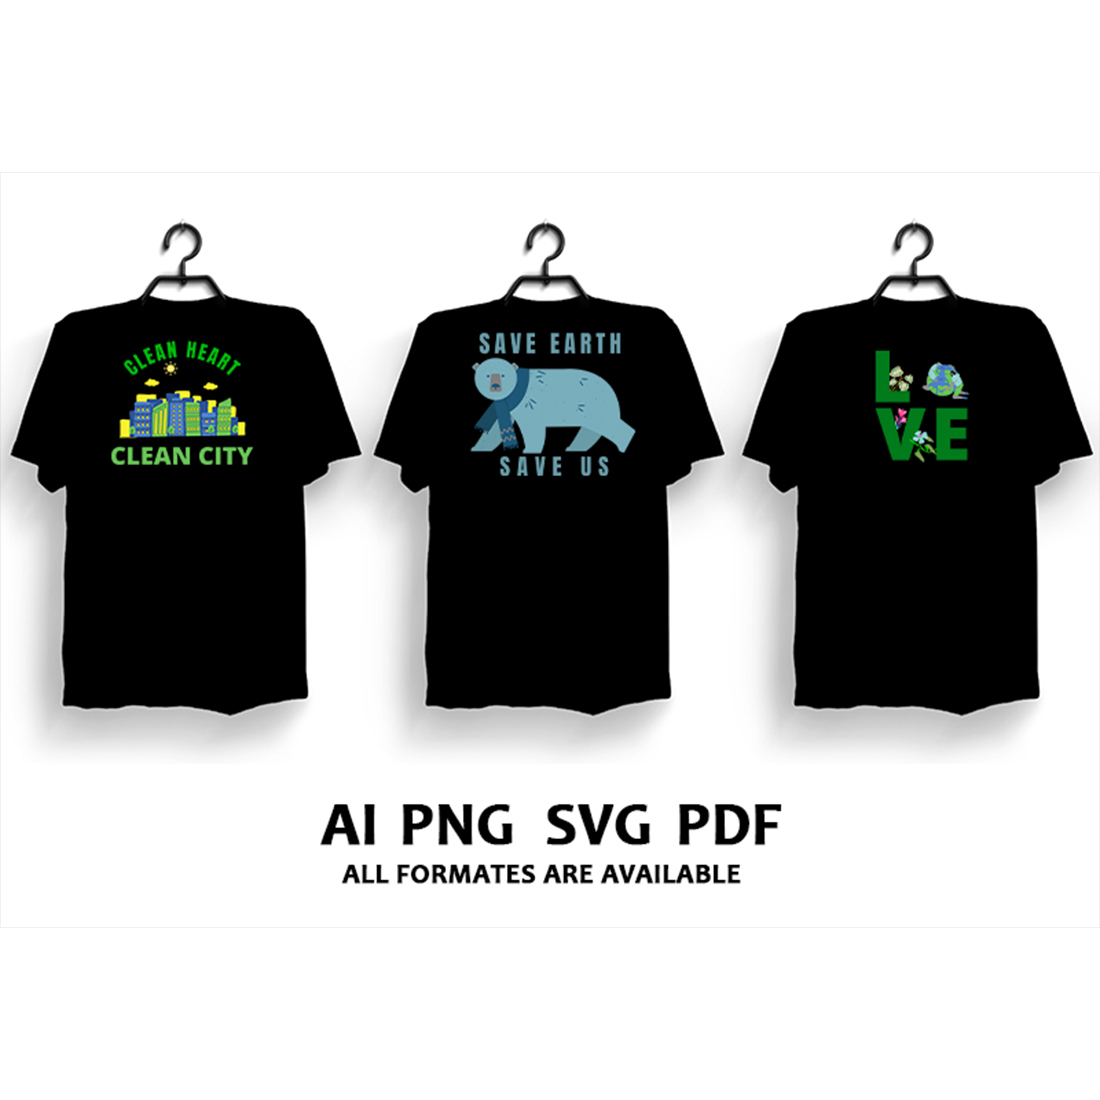 Collection of images of t-shirts with colorful prints on the theme of Earth Day